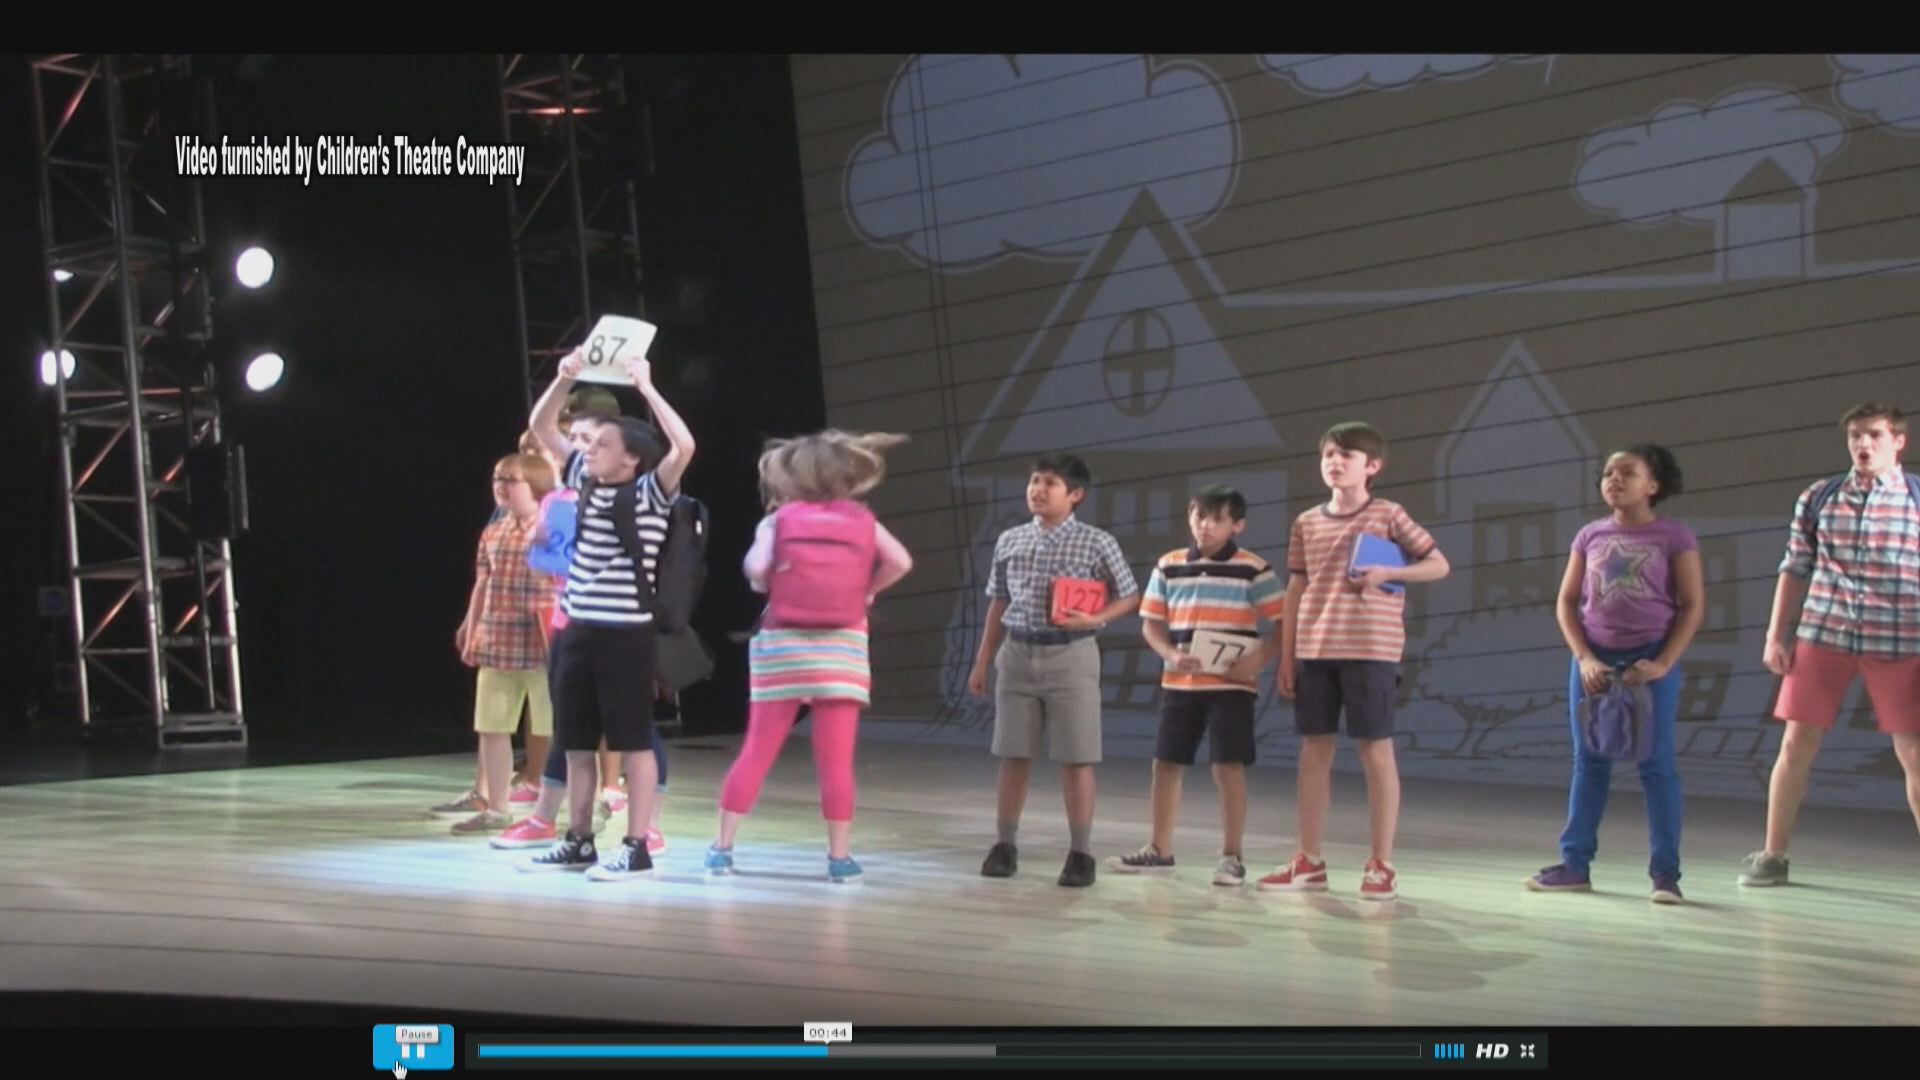 Diary of a Wimpy Kid the Musical